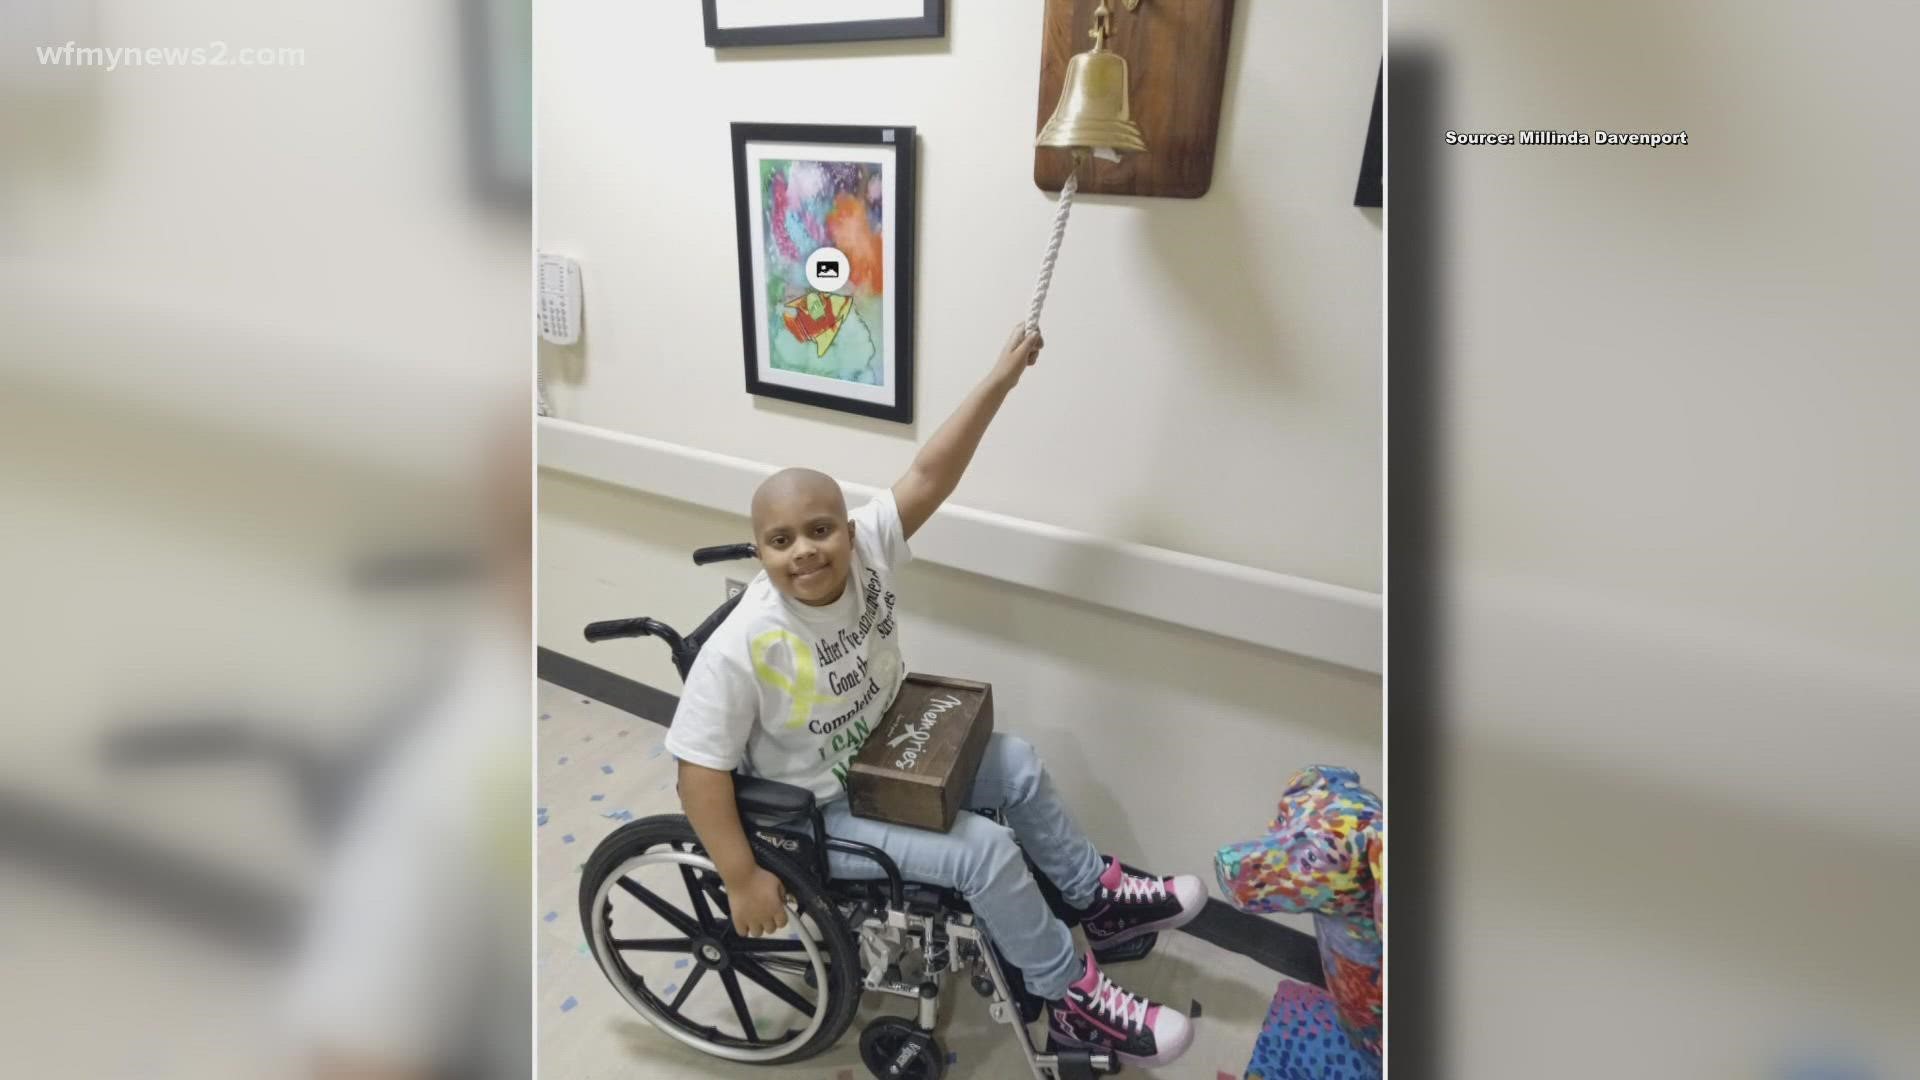 Leigha Davenport rang the bell after finishing 35 rounds of chemo. Now, she is working on rebuilding her strength.